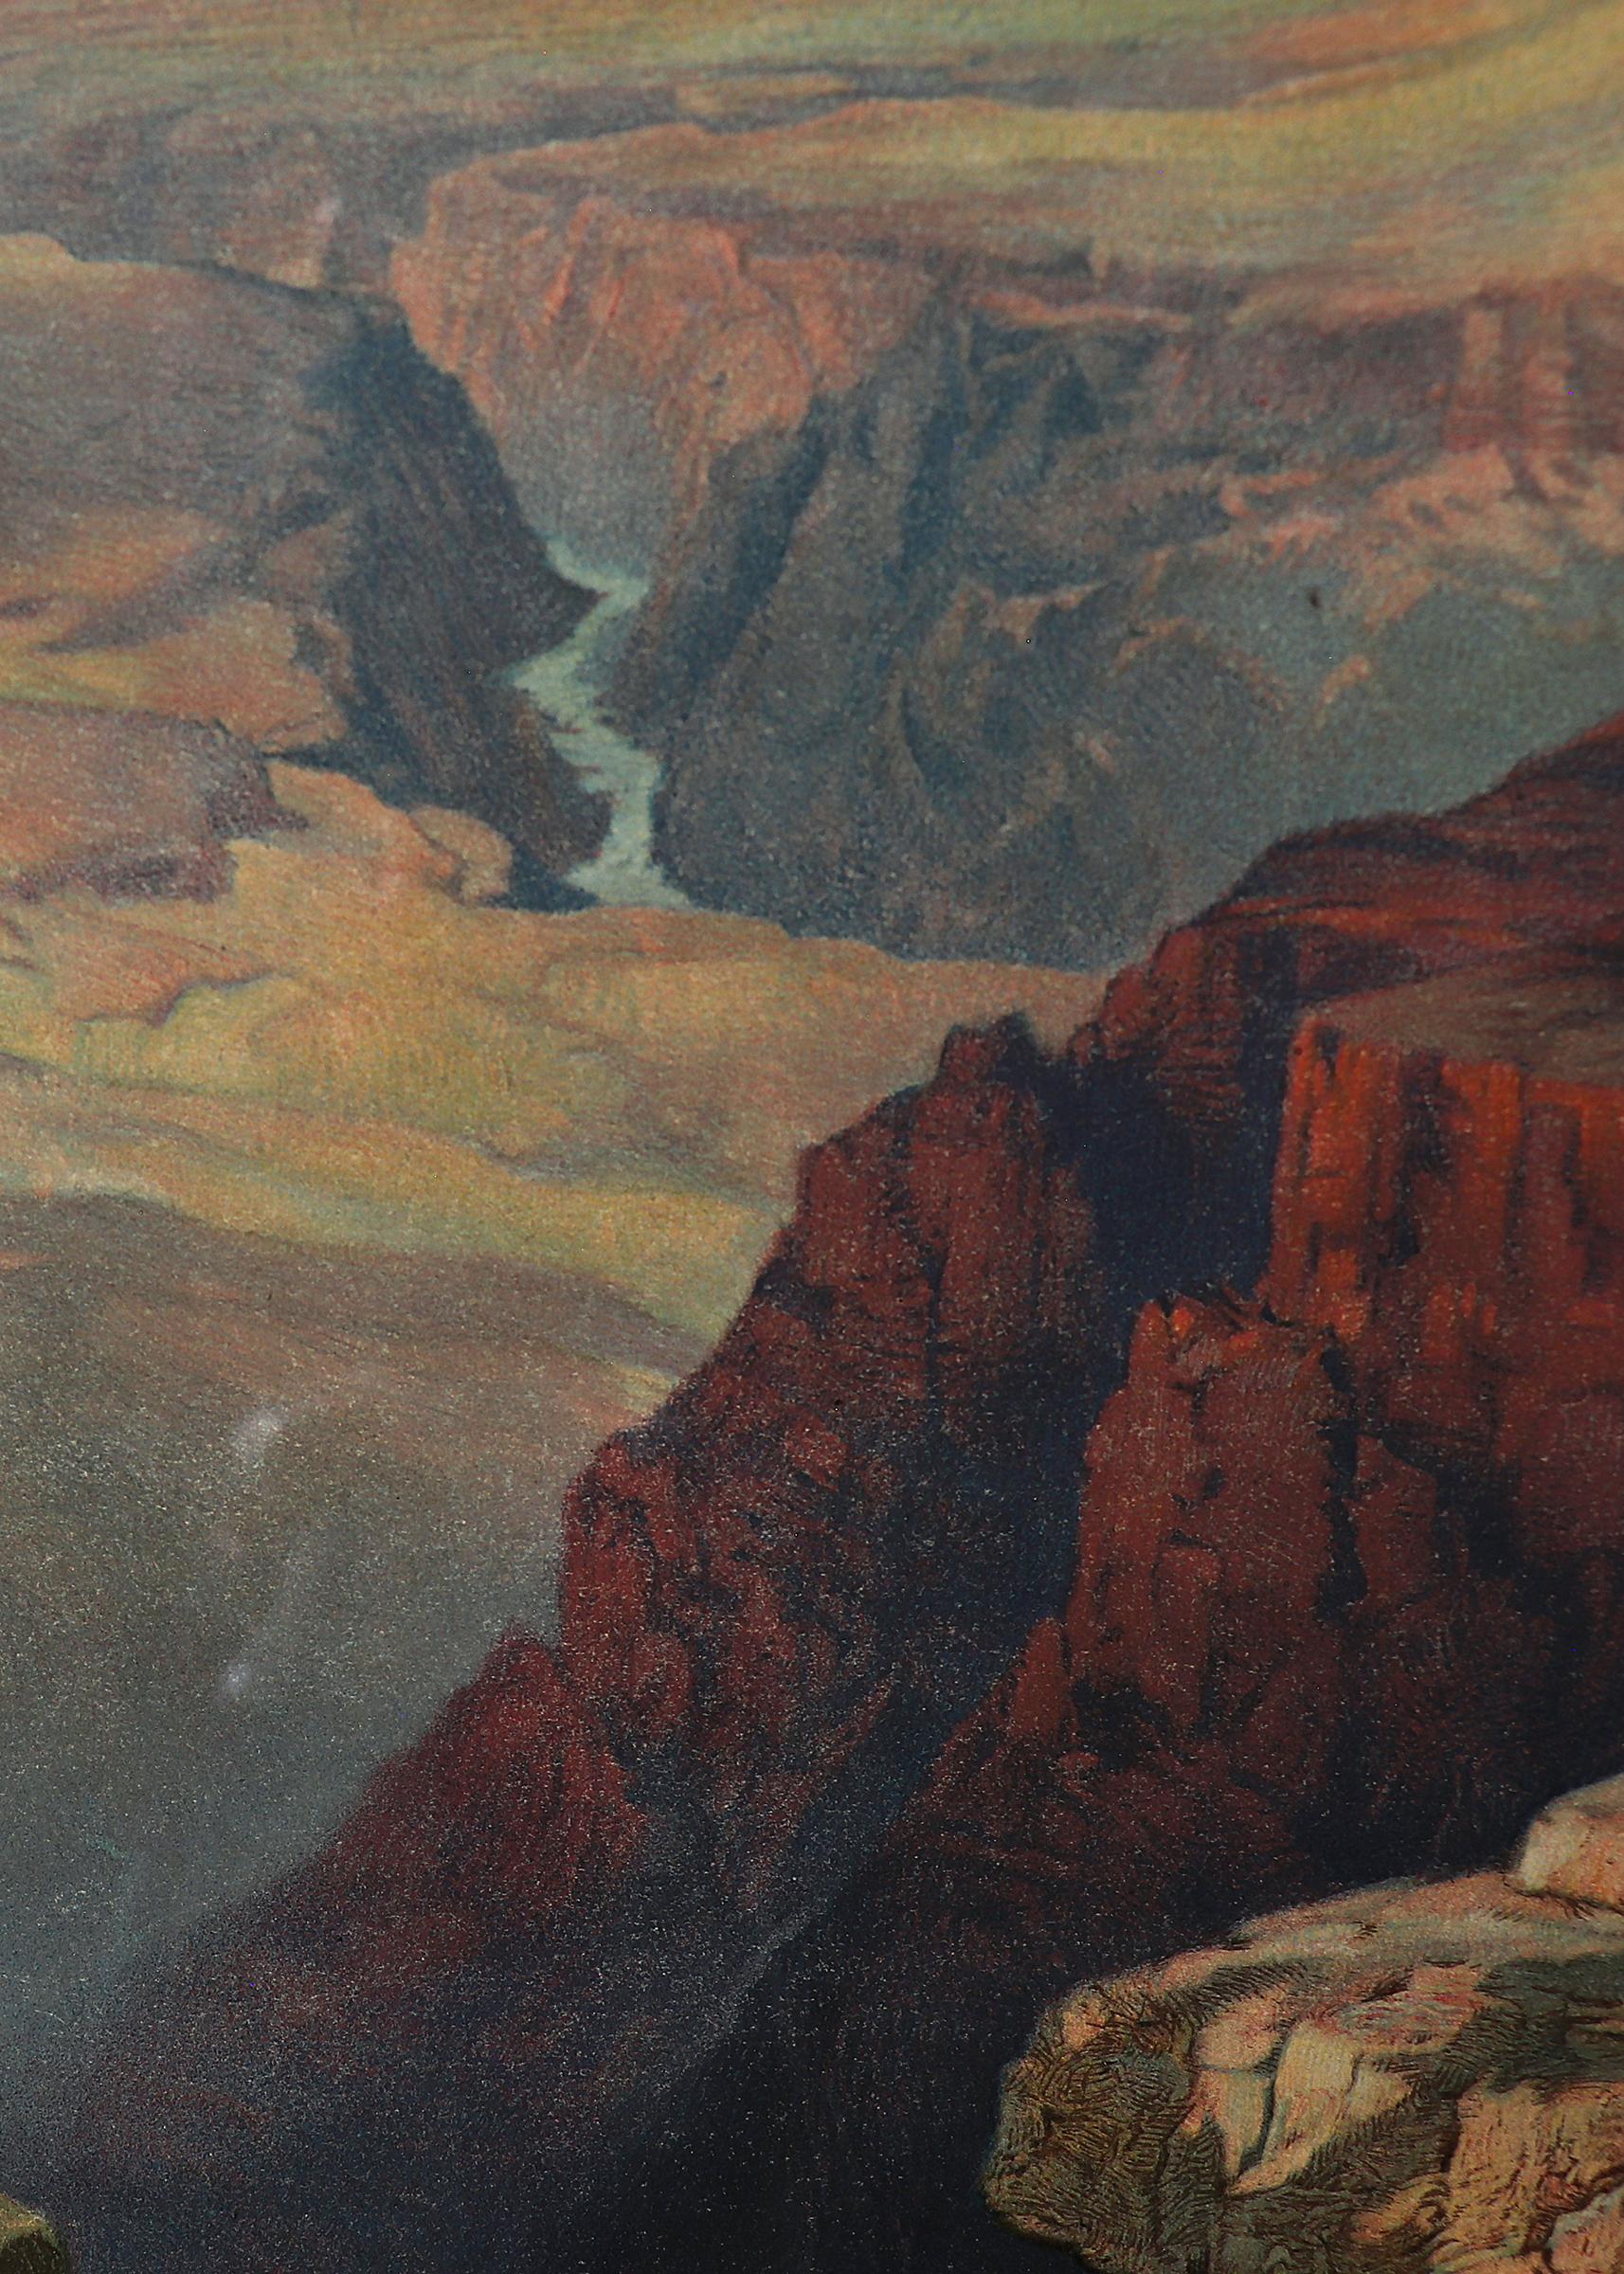 The Grand Canyon in Arizona from Hermit Rim by Thomas Moran.  Early 20th century vintage color lithograph printed in 1912, signed and dated within plate lower left, titled lower center margin. Presented in a custom hardwood frame with UV Protectant